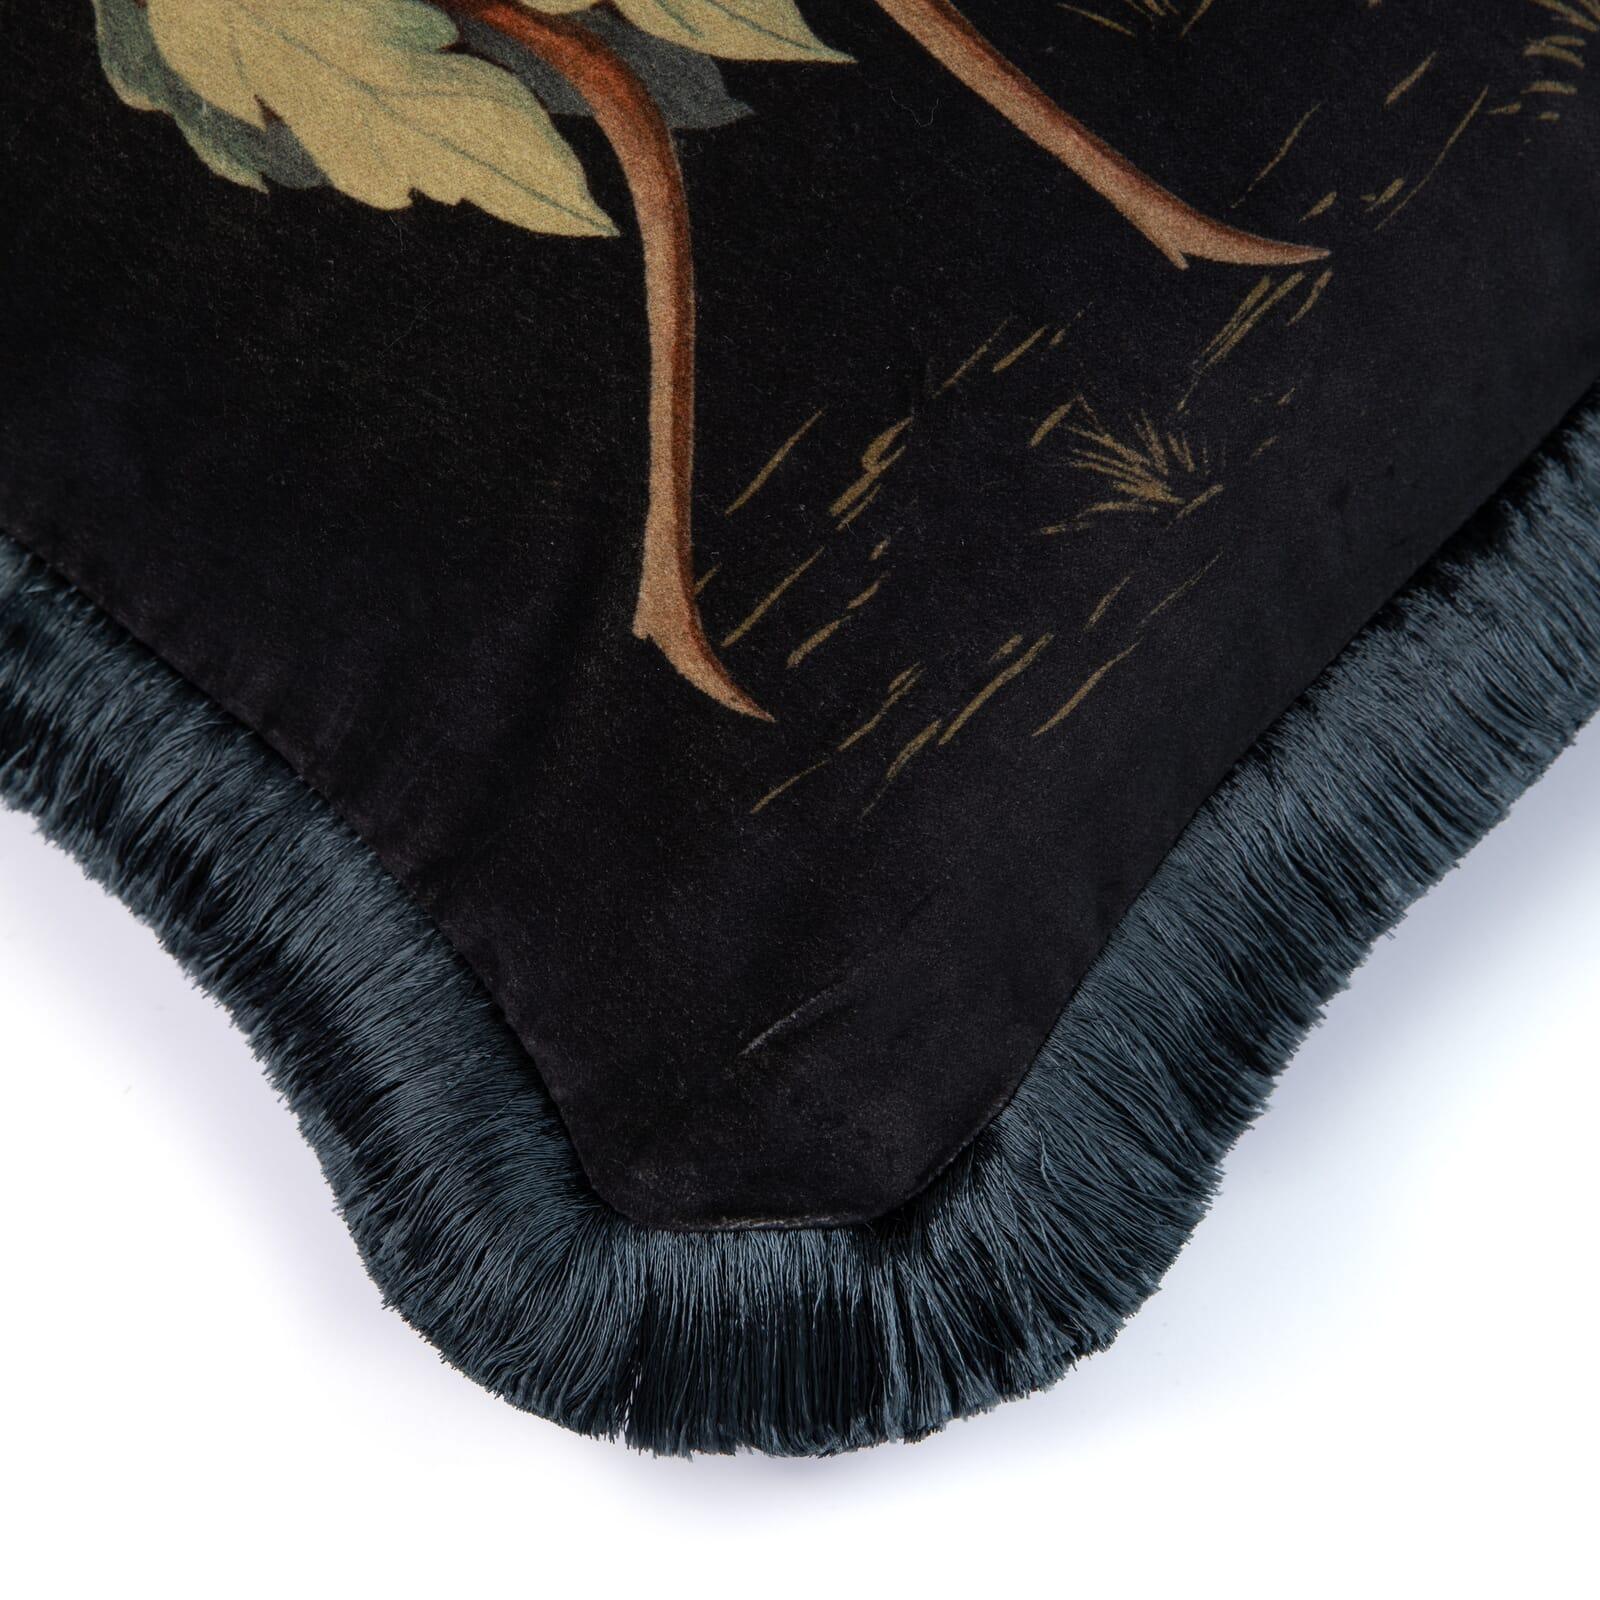 A love story for the ages, behold our 1950s inspired THE LOVE LETTER. Posies exchange sweet nothings on this sumptuous black velvet cushion, plumped with responsibly sourced wool from our partners at The Woolkeepers®, and finished with a luxurious